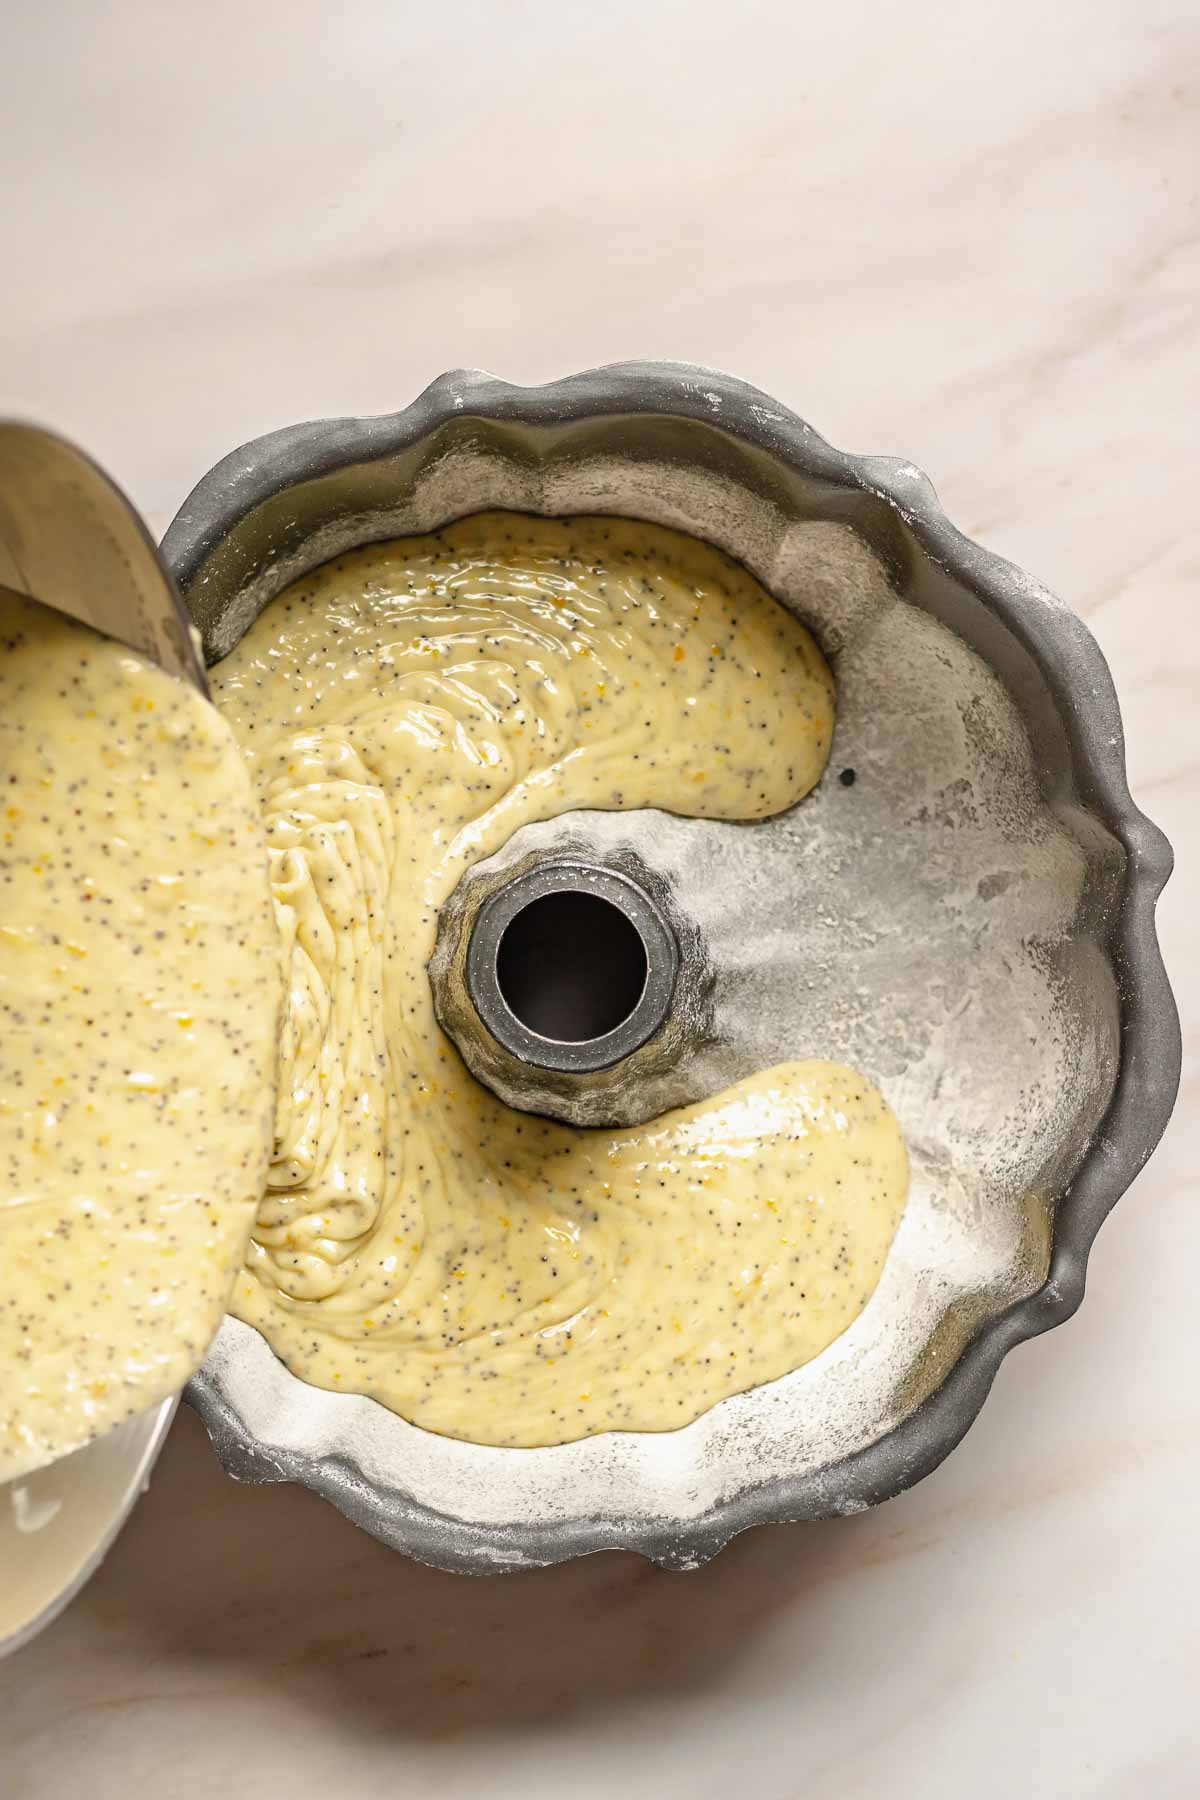 Cake batter pouring into a prepared bundt pan.